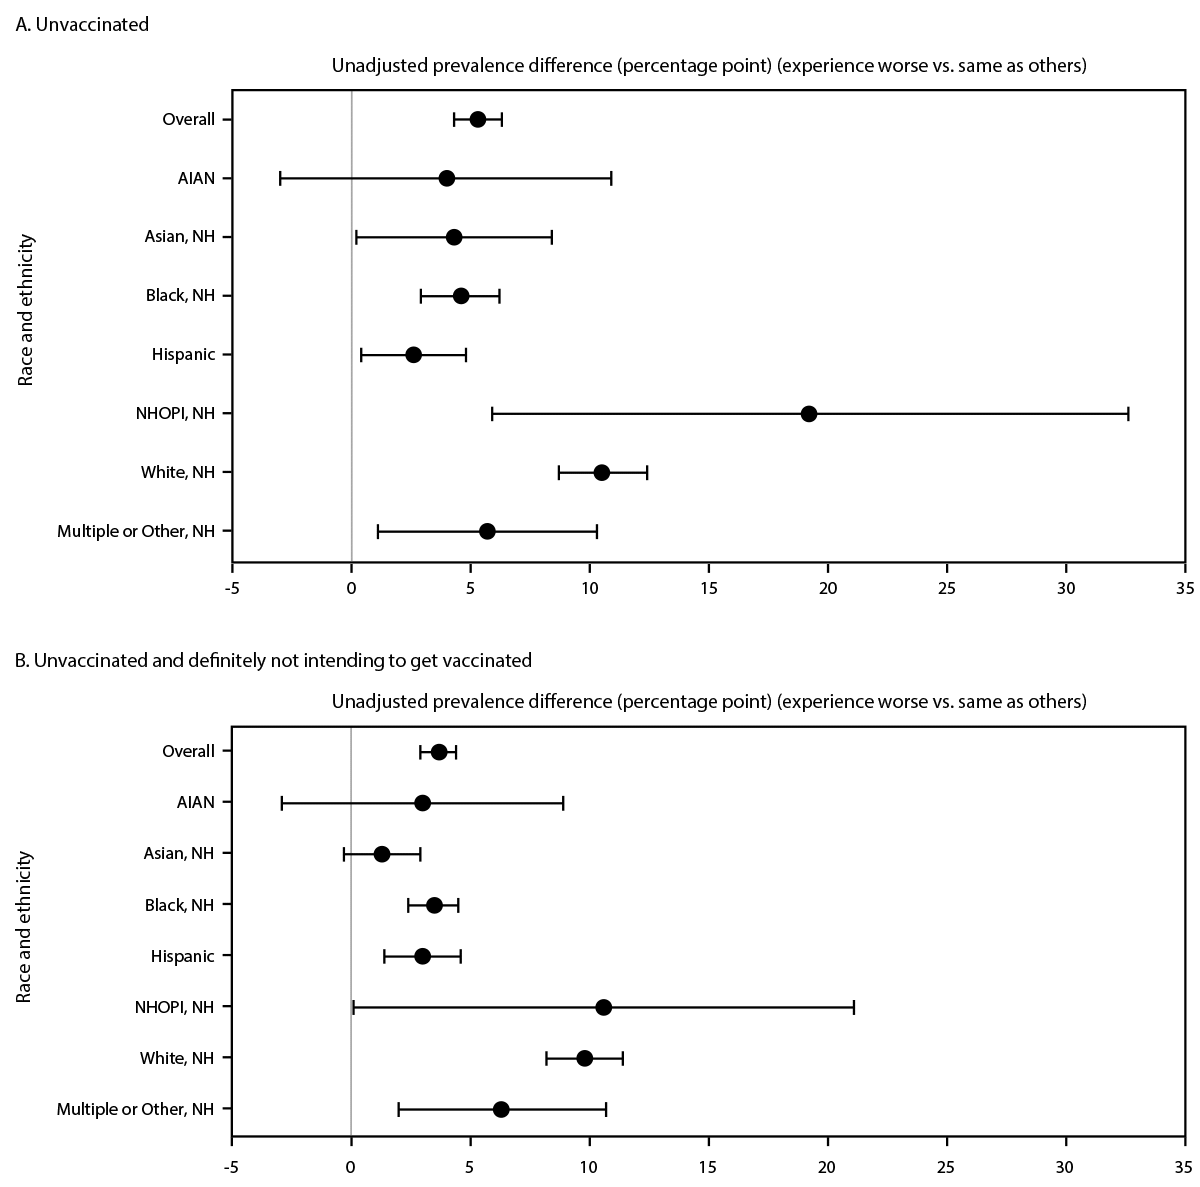 The figure is two graphs showing the unadjusted association between experiences while seeking health care and being unvaccinated and unvaccinated and definitely not intending to get vaccinated, overall and by race and ethnicity, constructed using data provided by the National Immunization Survey – Adult COVID Module during April 22, 2021–November 26, 2022.